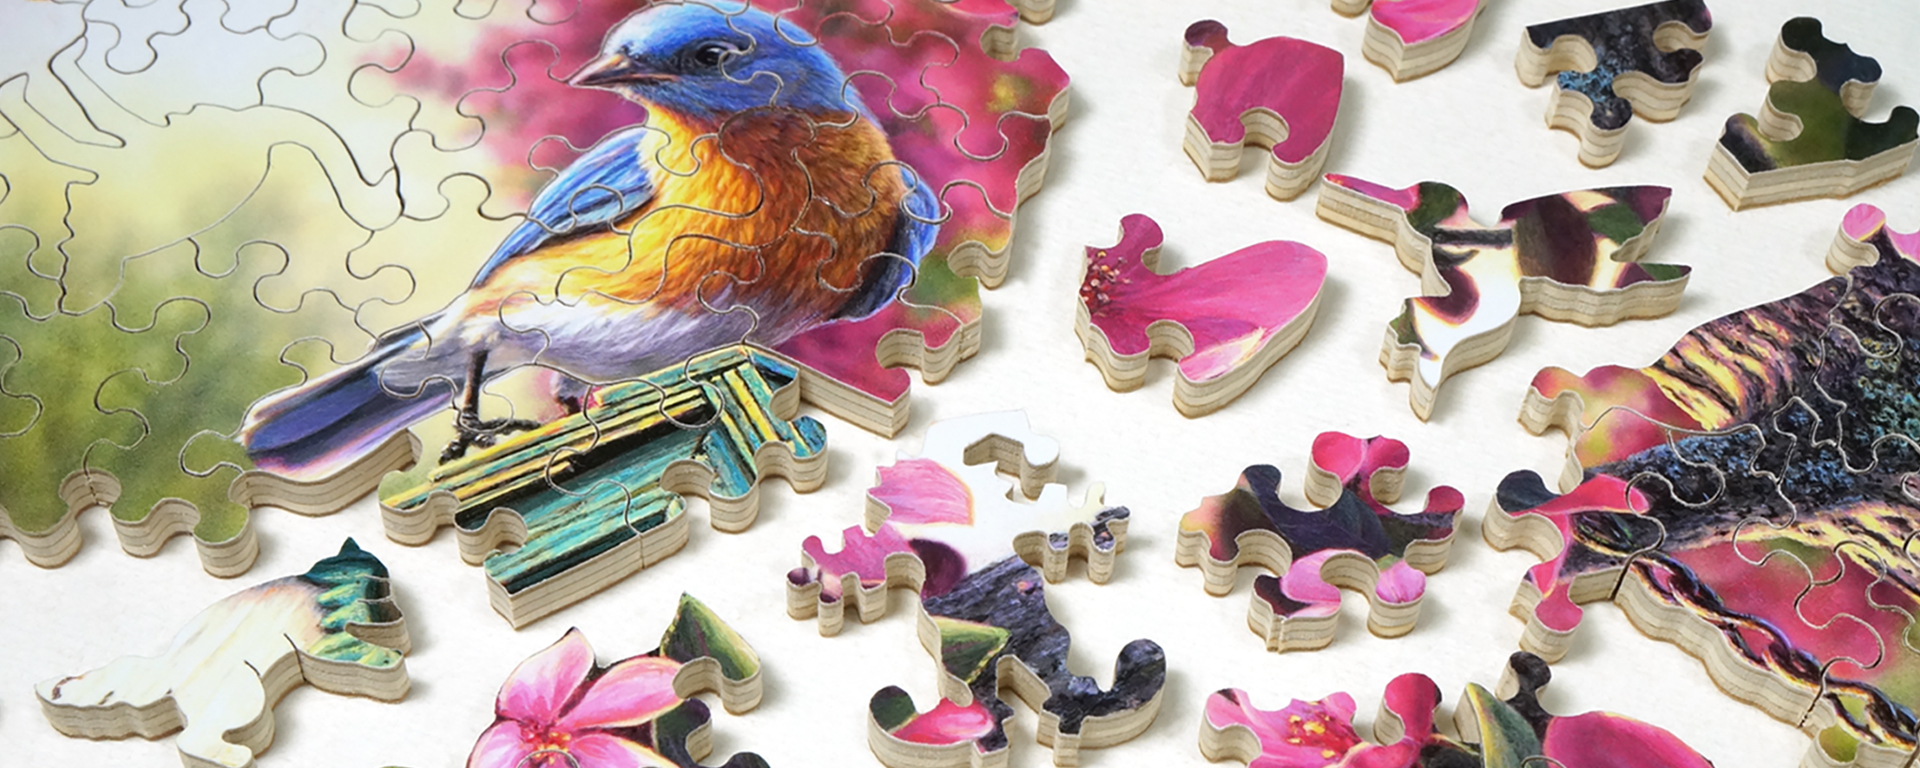 Wooden bird jigsaw puzzle in progress featuring a bluebird and a variety of whimsy shaped pieces such as a hummingbird and a fox.